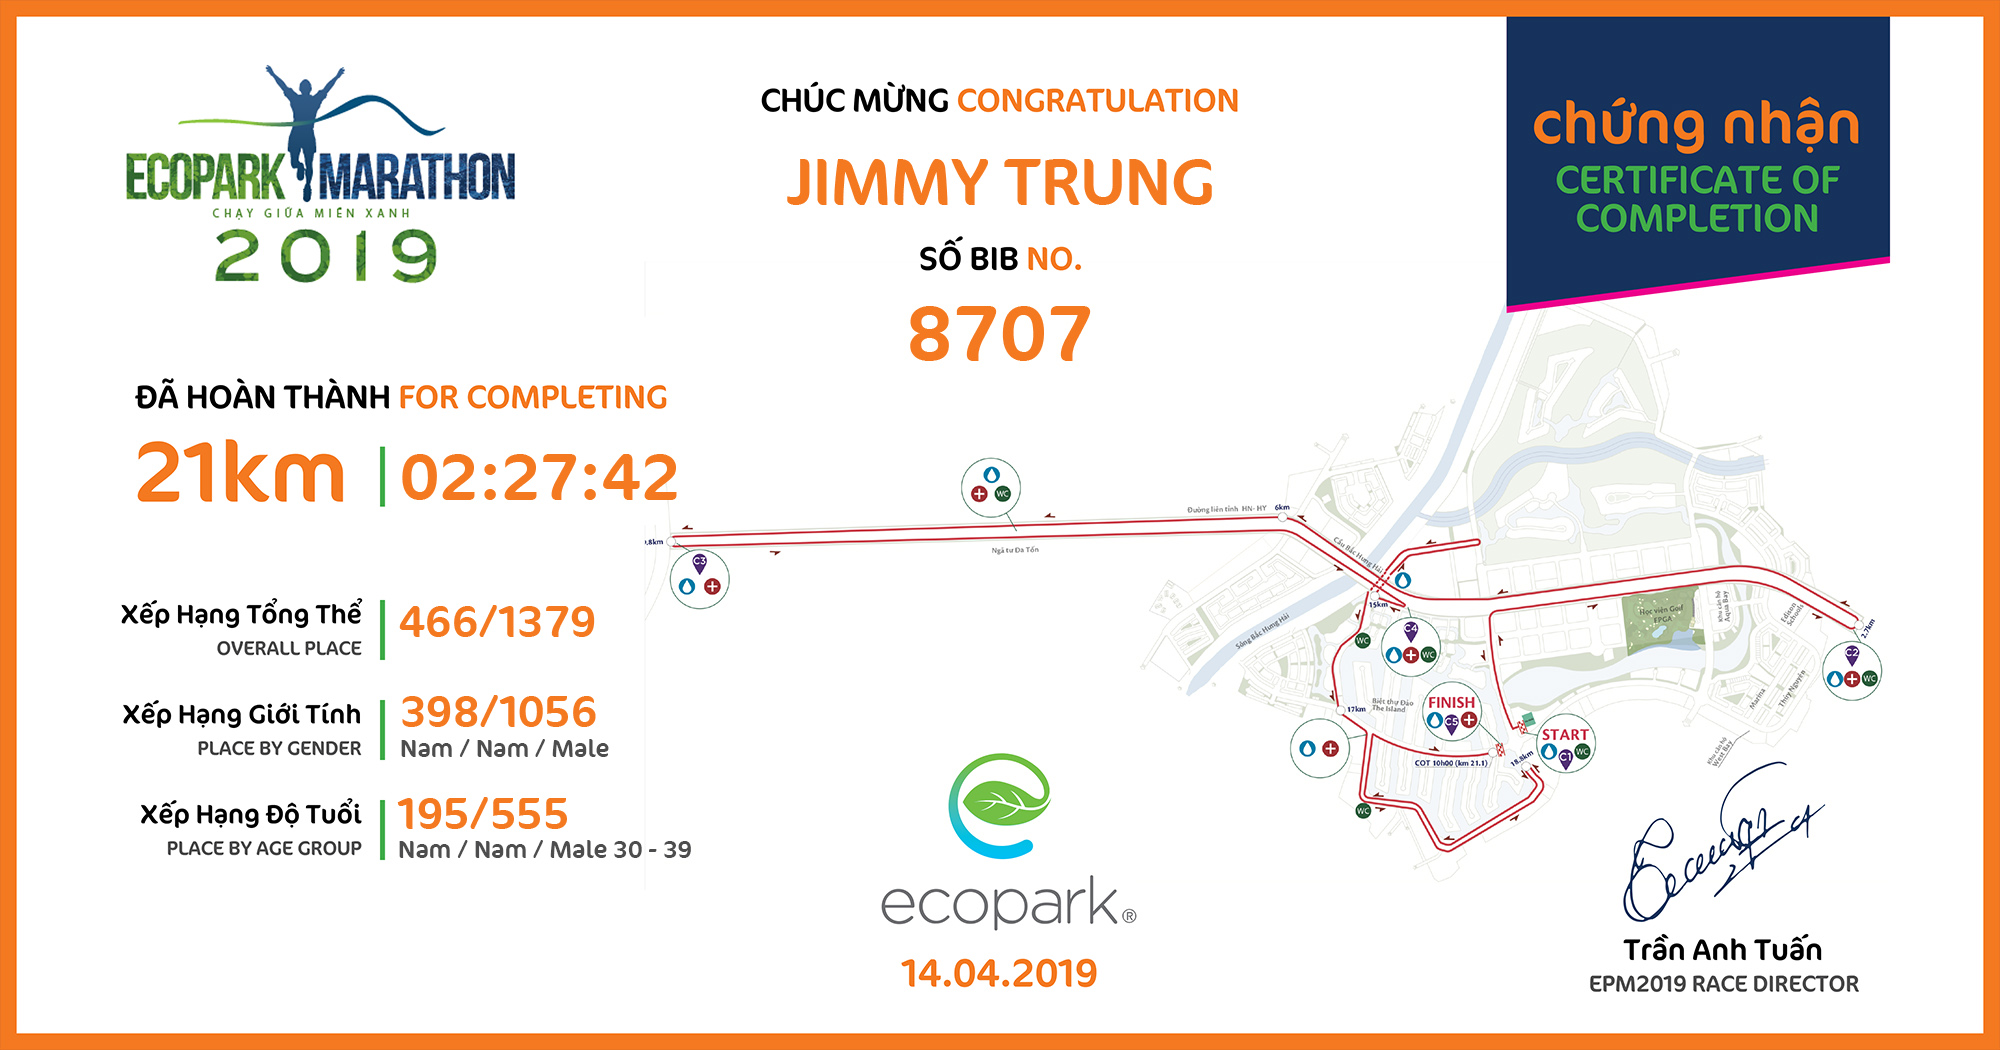 8707 - Jimmy Trung